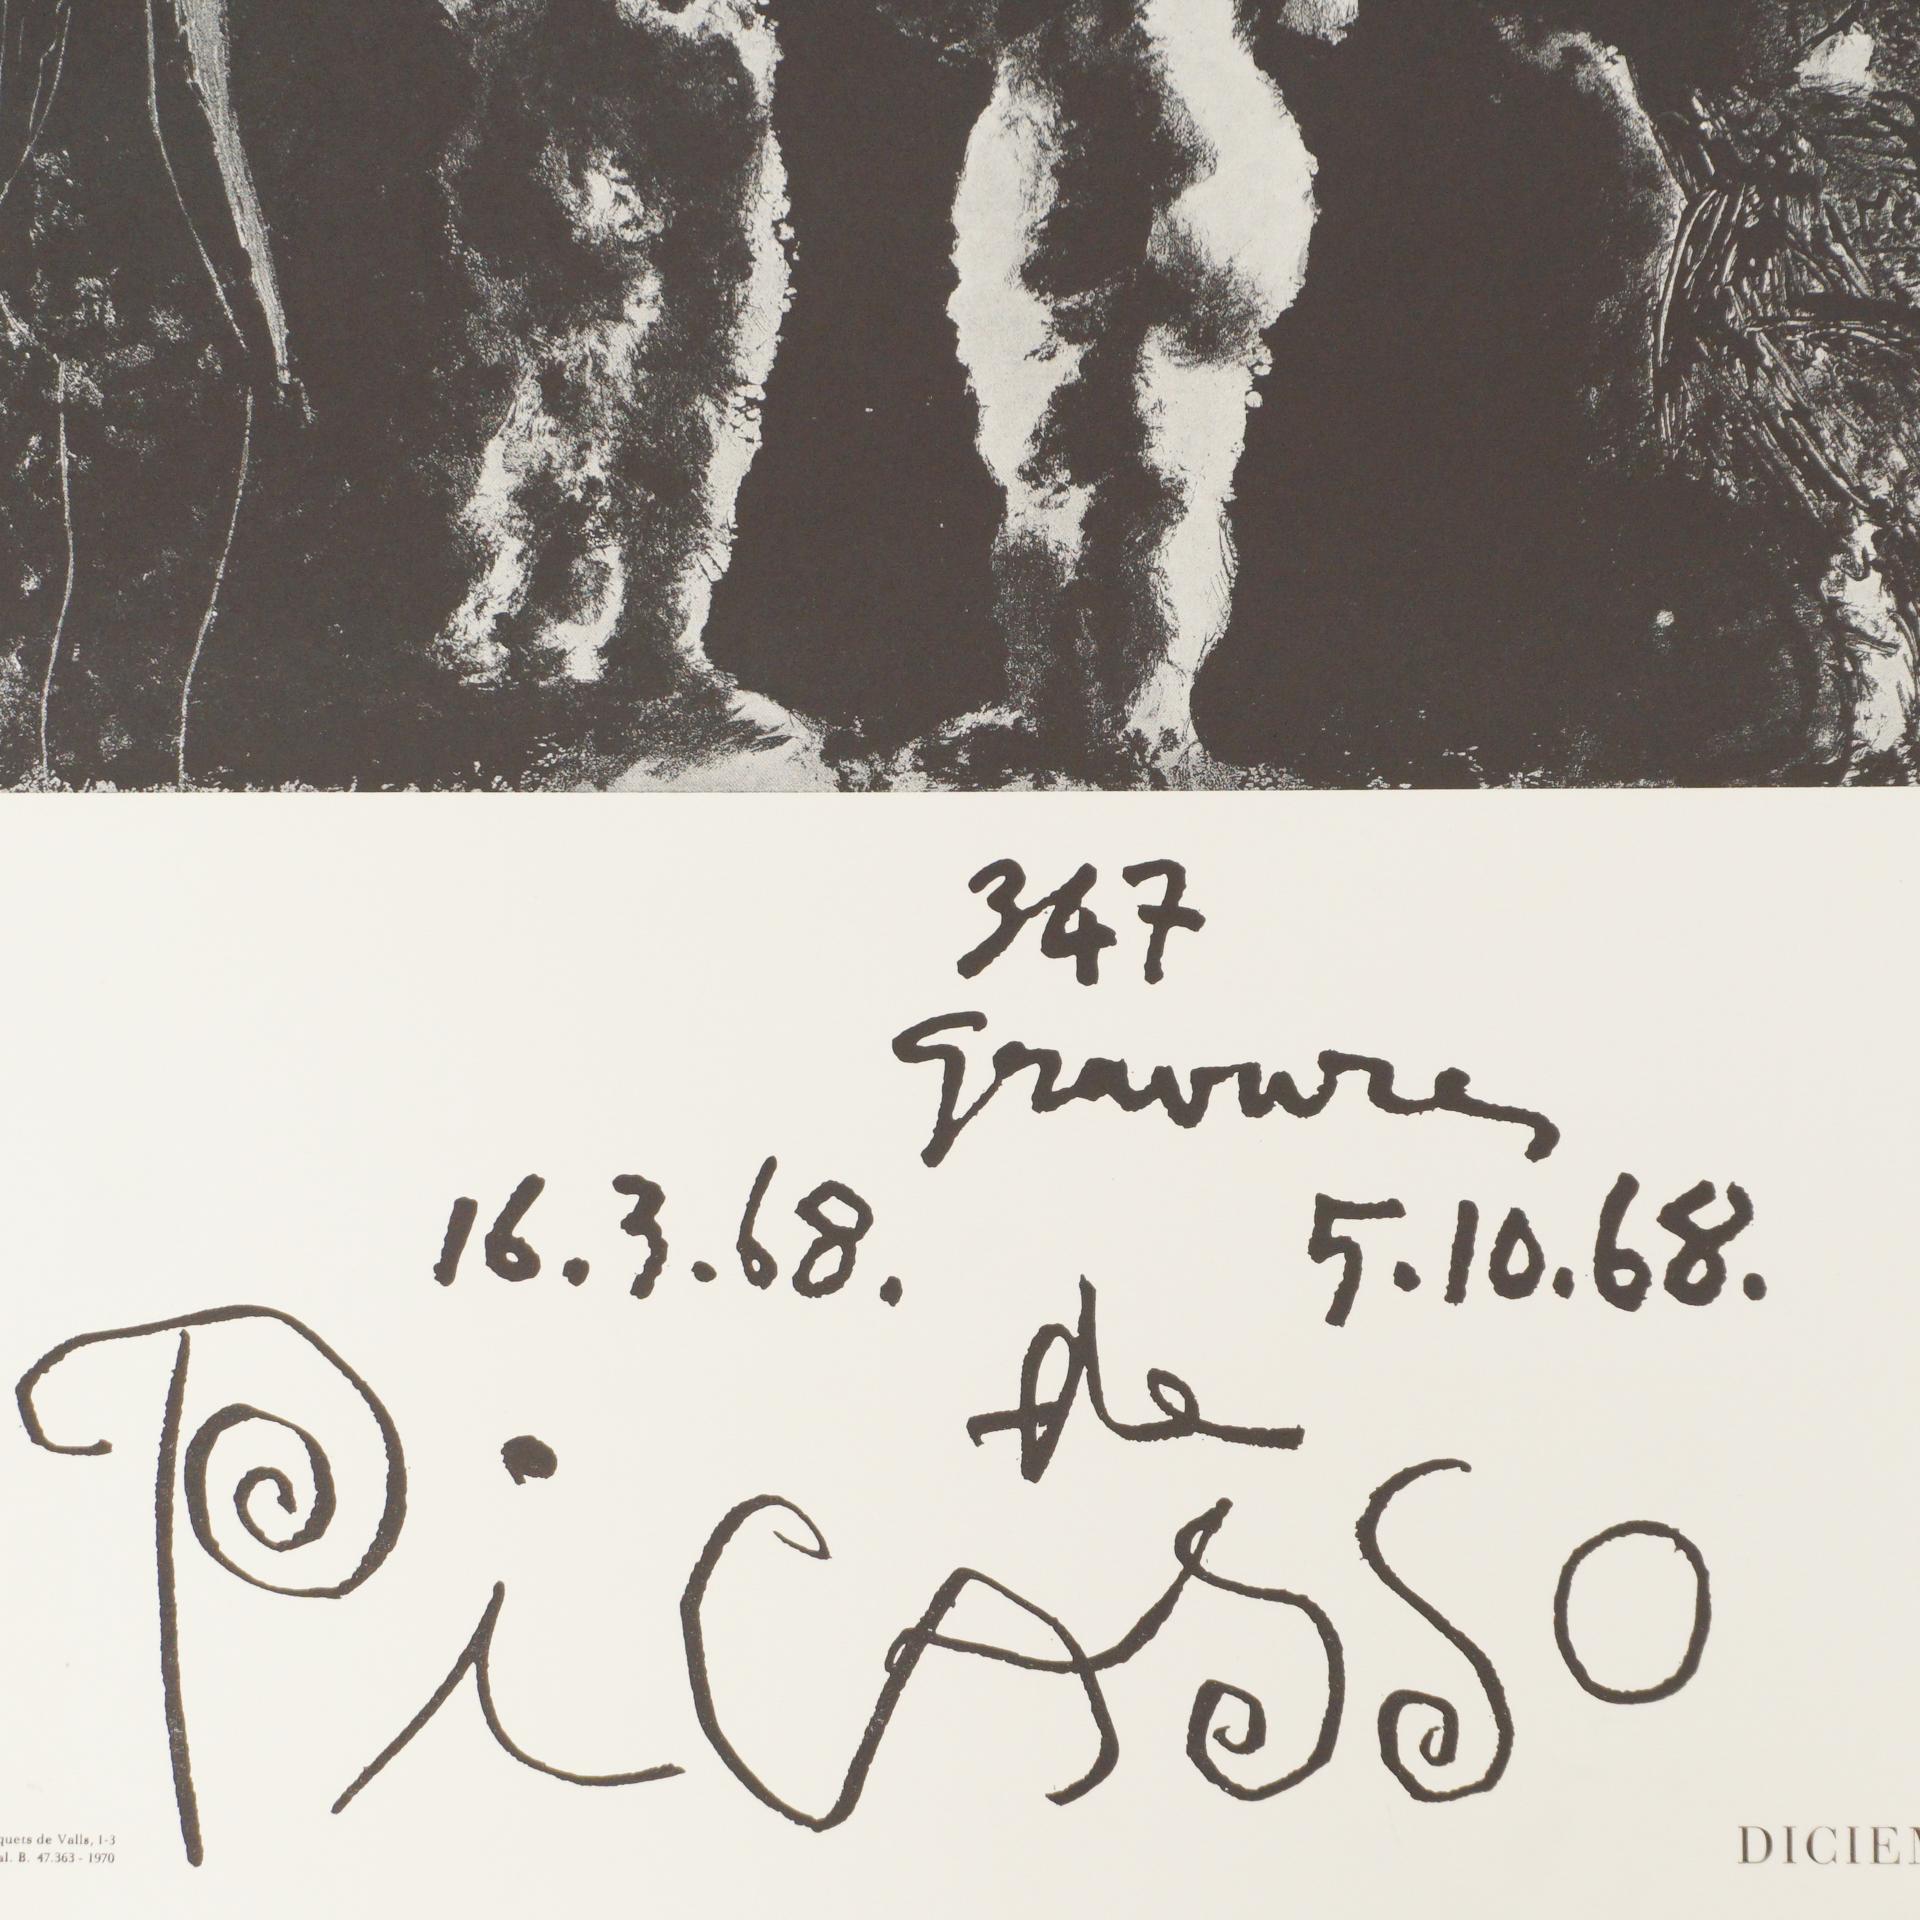 Spanish Pabli Picasso Lithographic Exhibition Poster, 1968